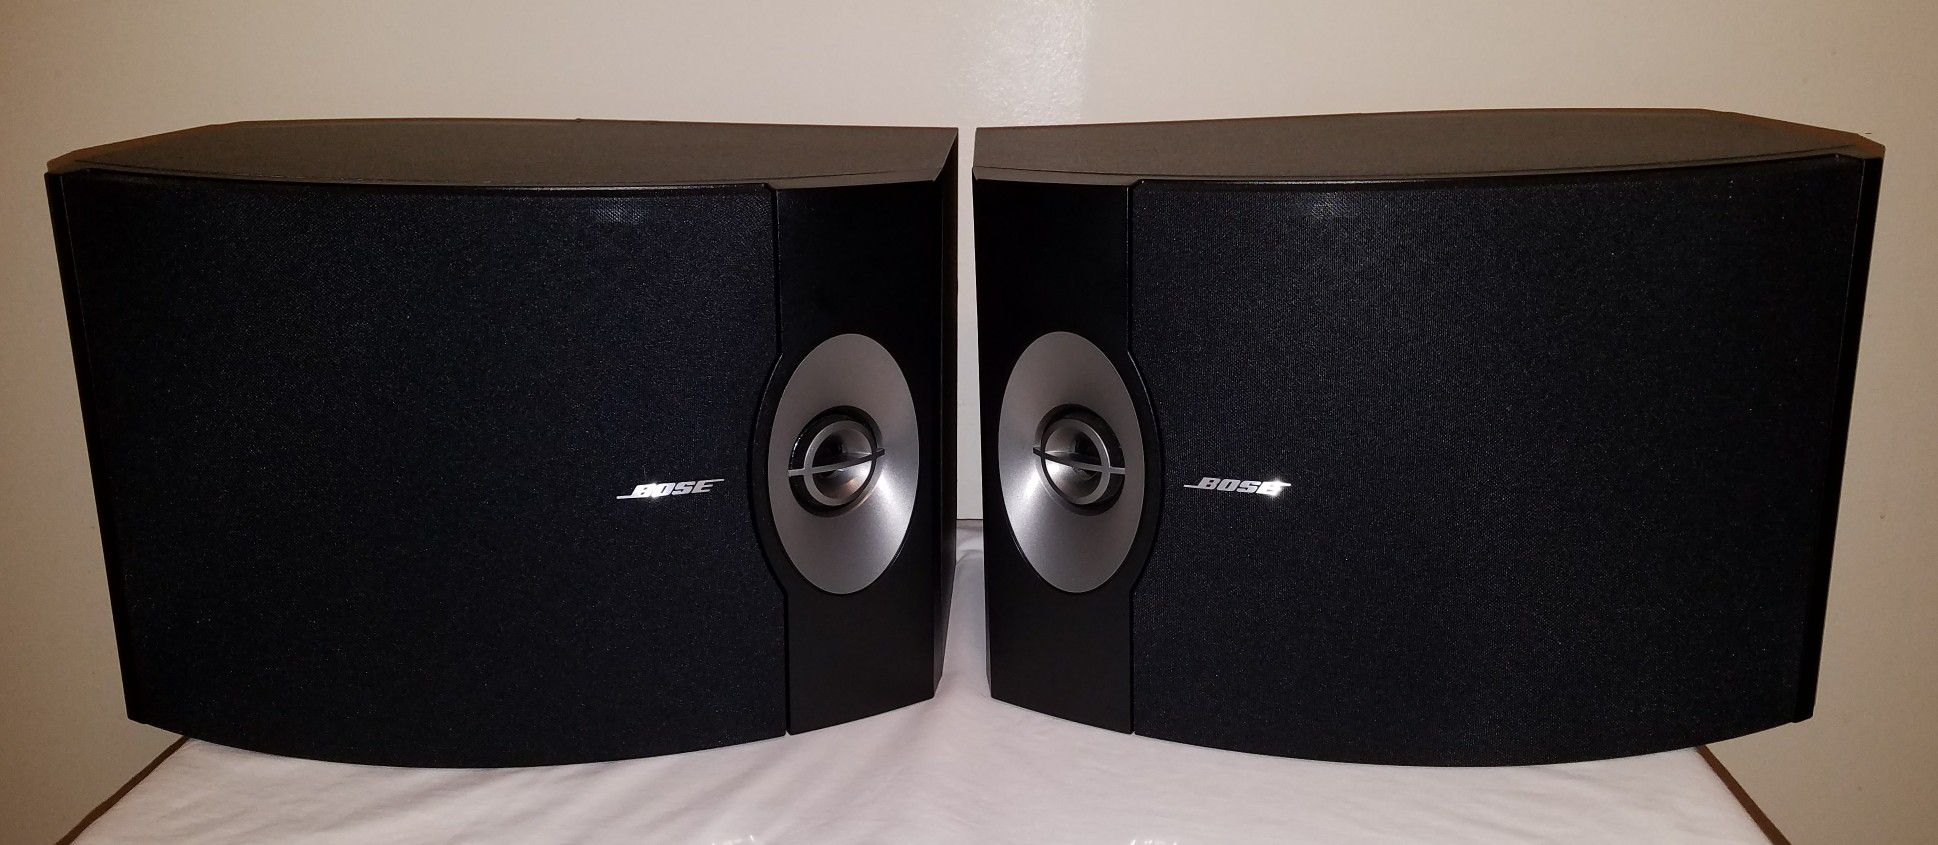 pedal civilisere Krympe Bose 301 Series V Speakers **Mint** for Sale in Chicago, IL - OfferUp